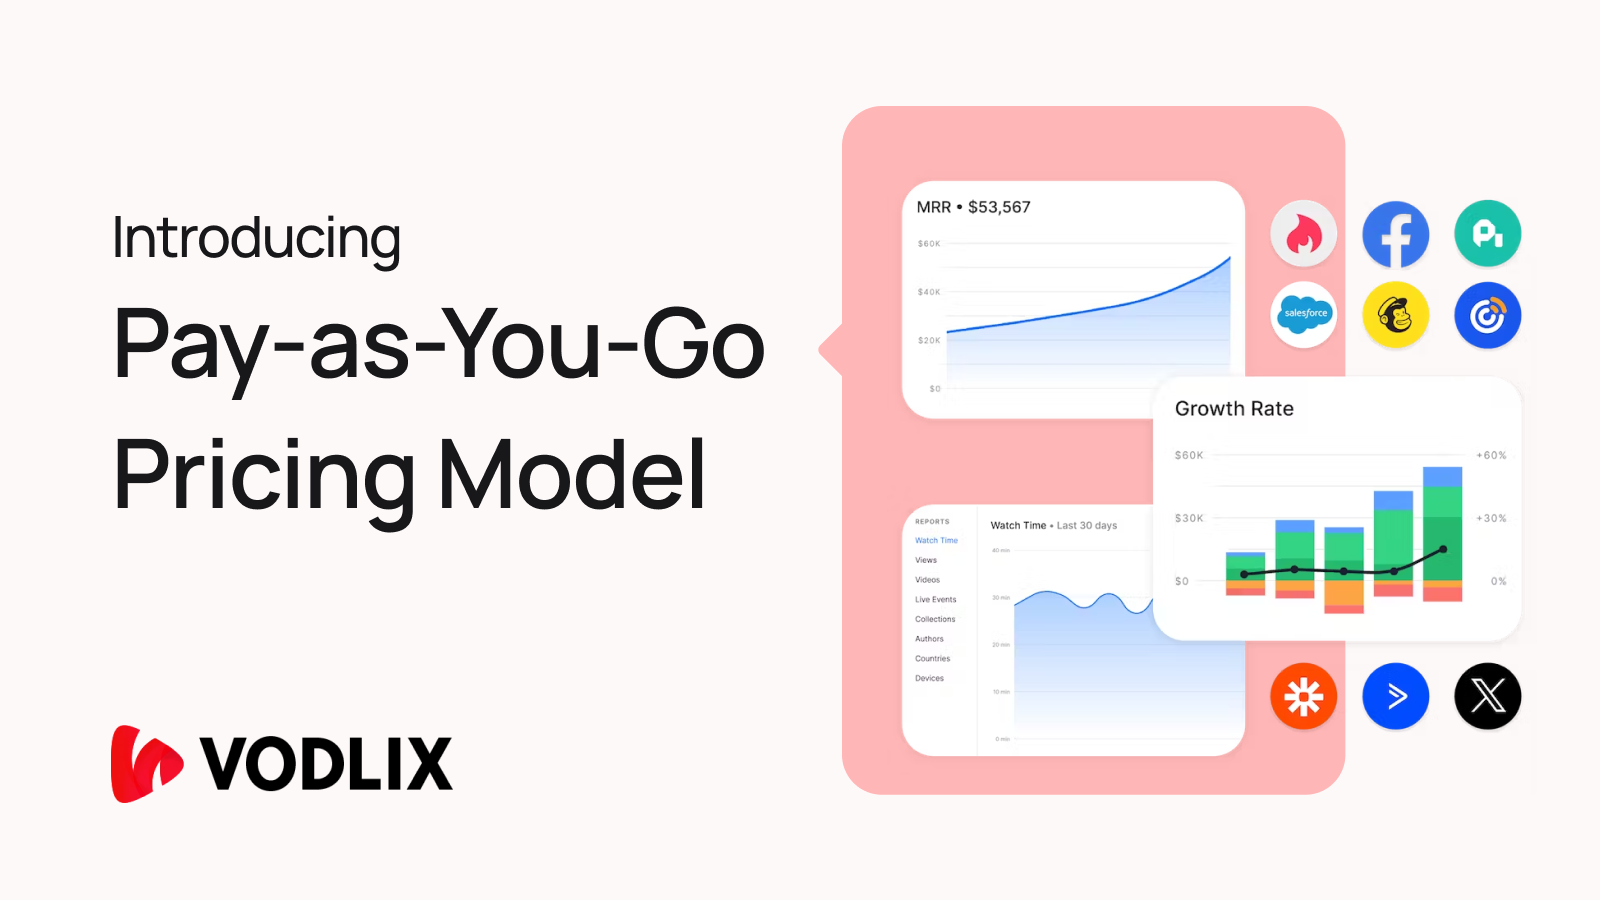 Introducing the Pay-as-You-Go Pricing Model